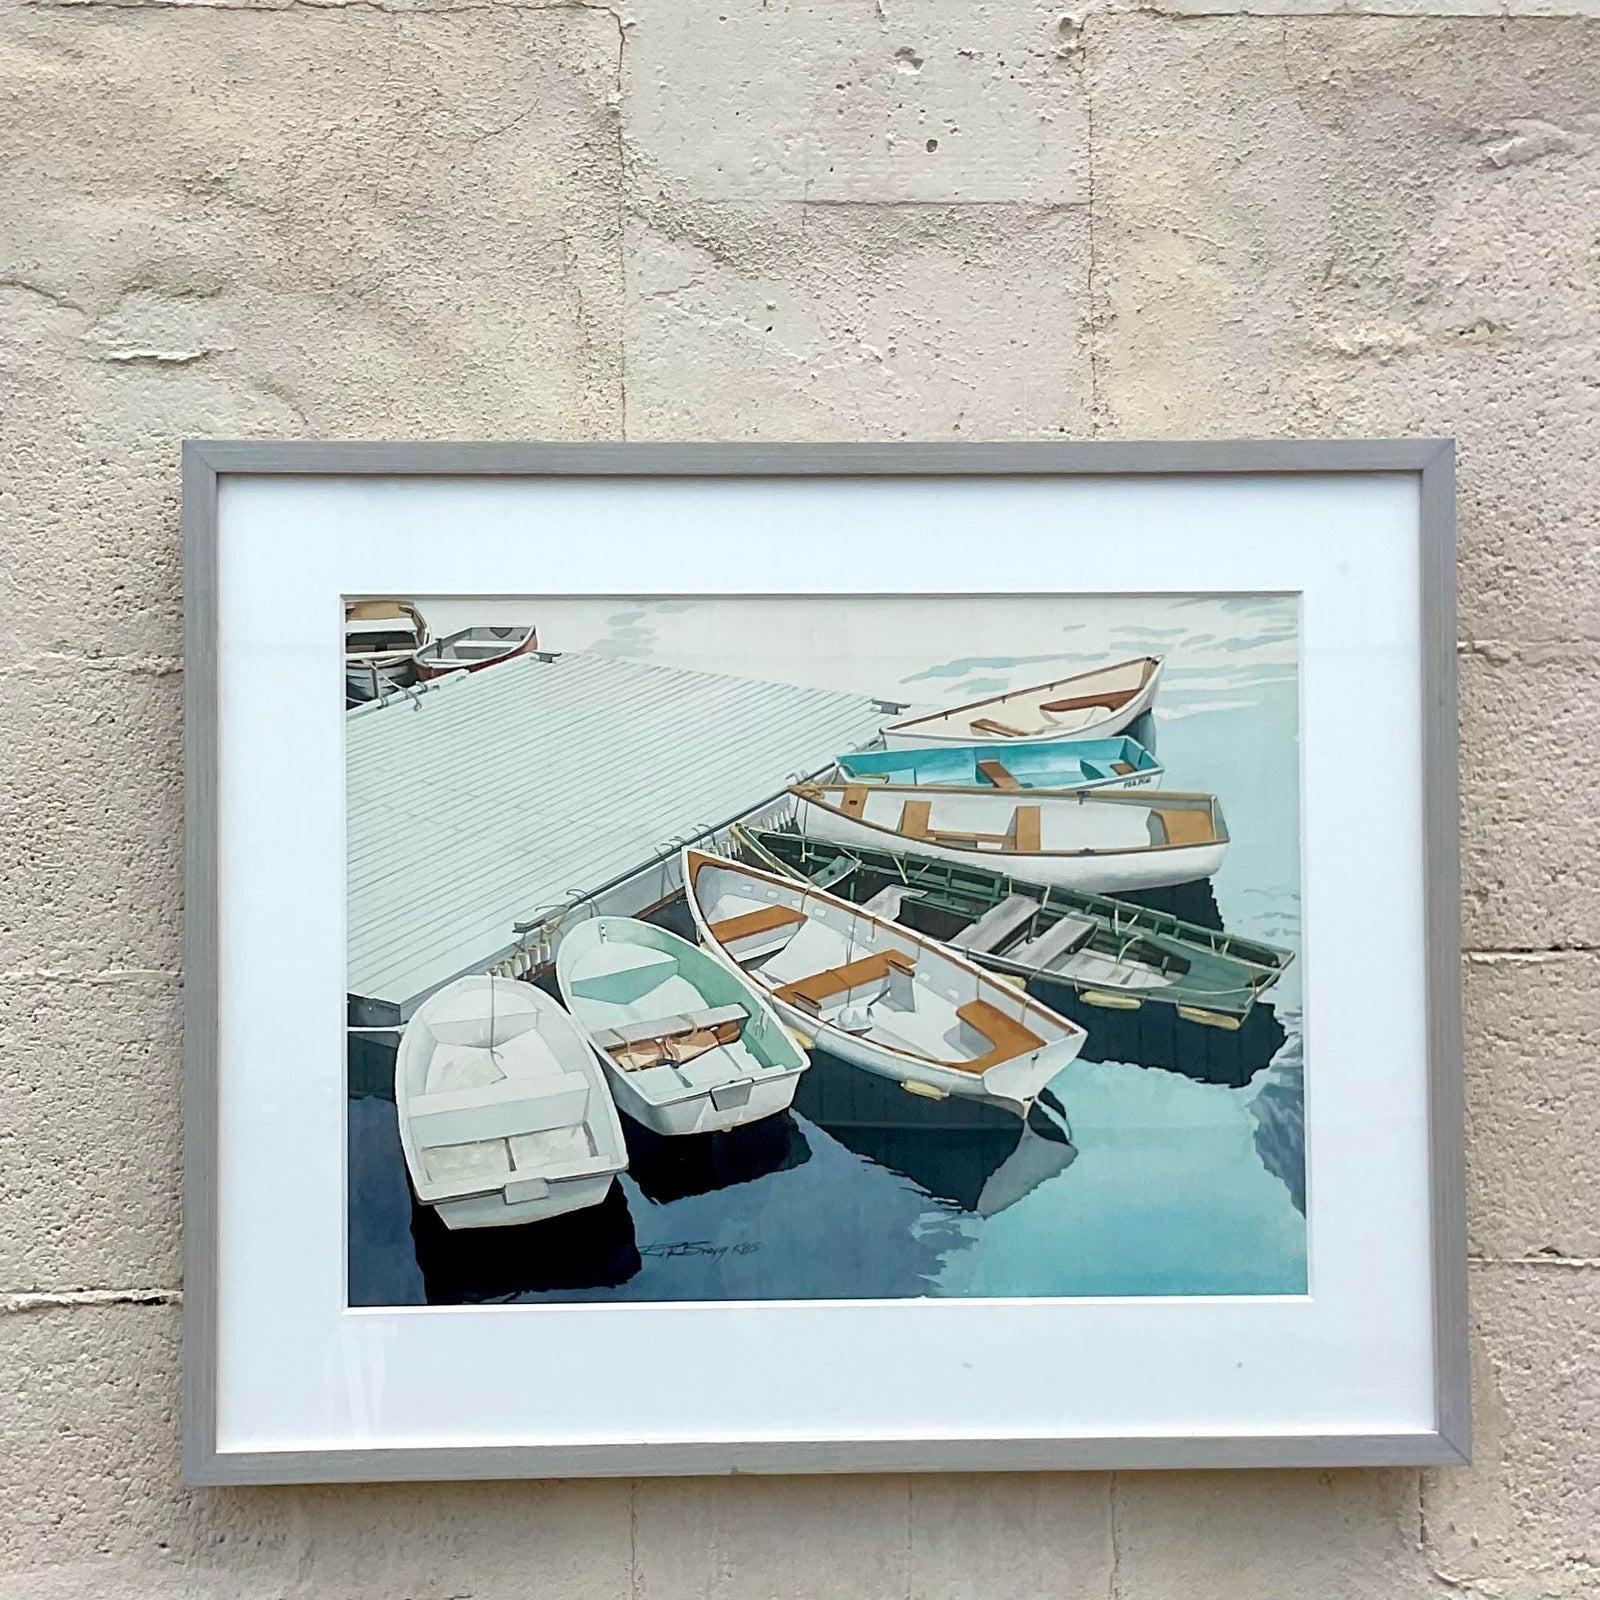 A fantastic vintage watercolor painting framed of dinghy’s tied up at a dock by artist Robert W. Bragg. Acquired at a Palm Beach estate.